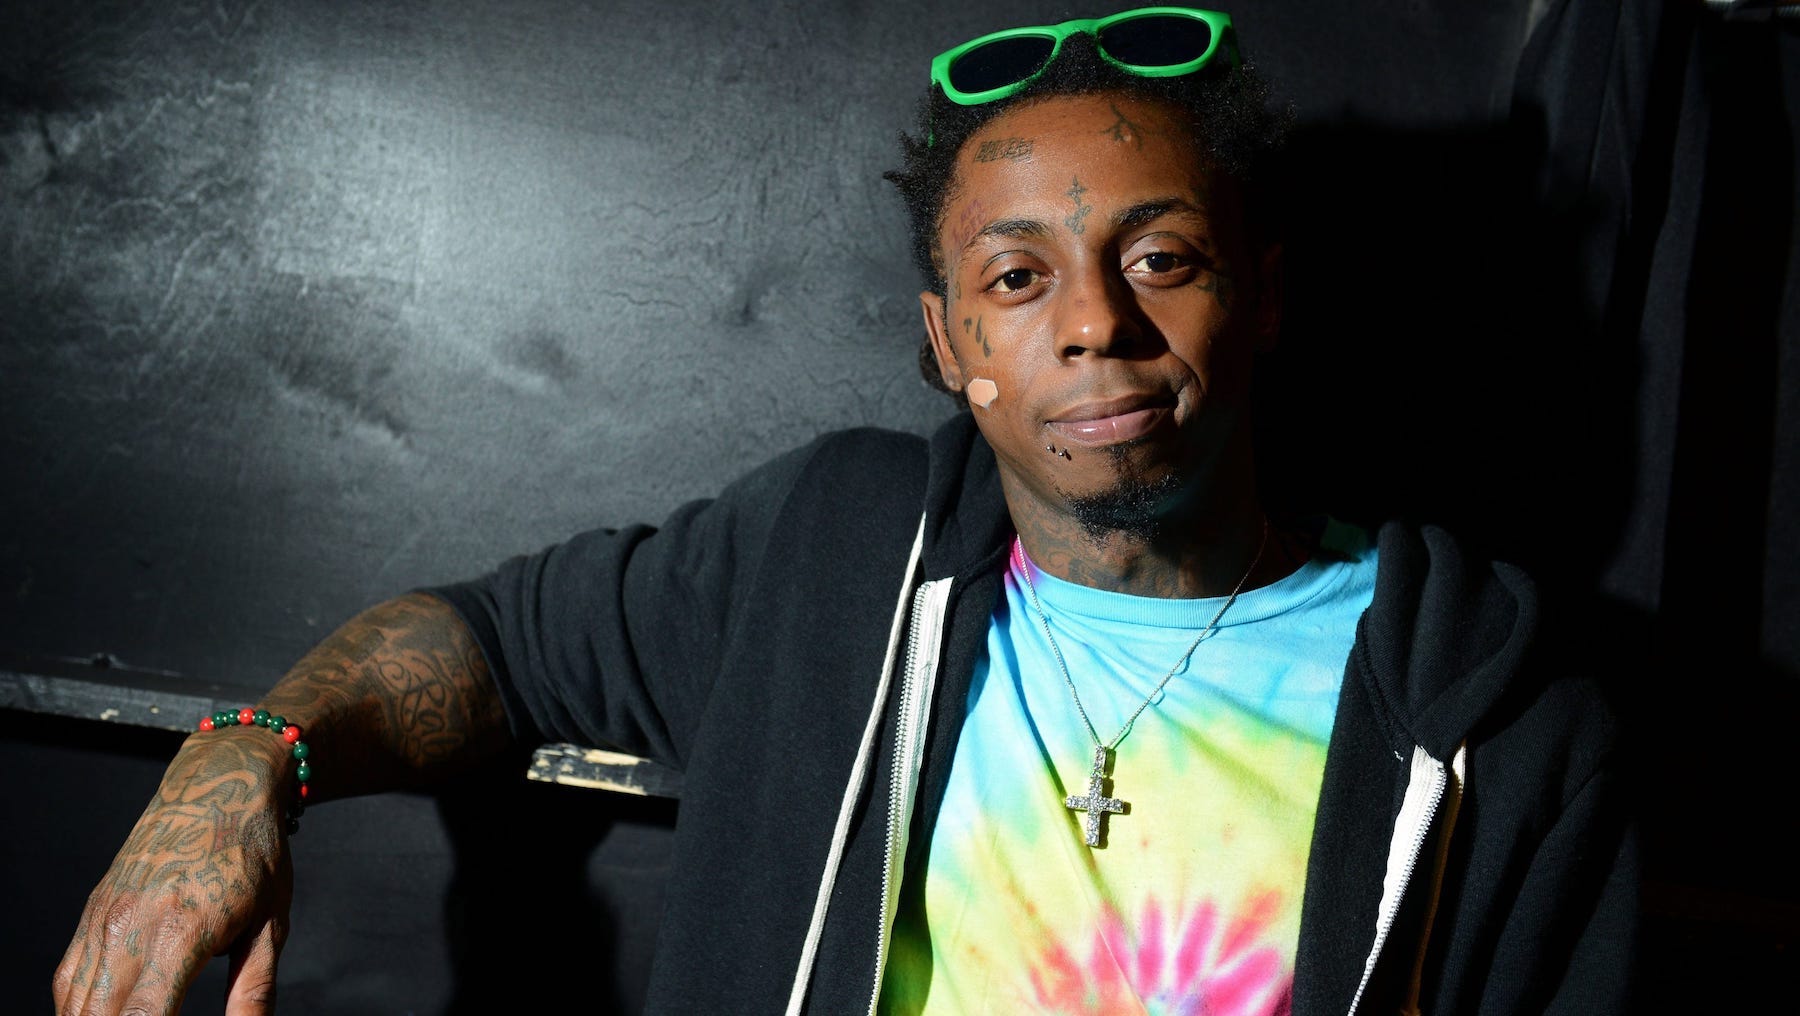 Lil Wayne is now setting his sights on the rapidly growing sport of pickleball.